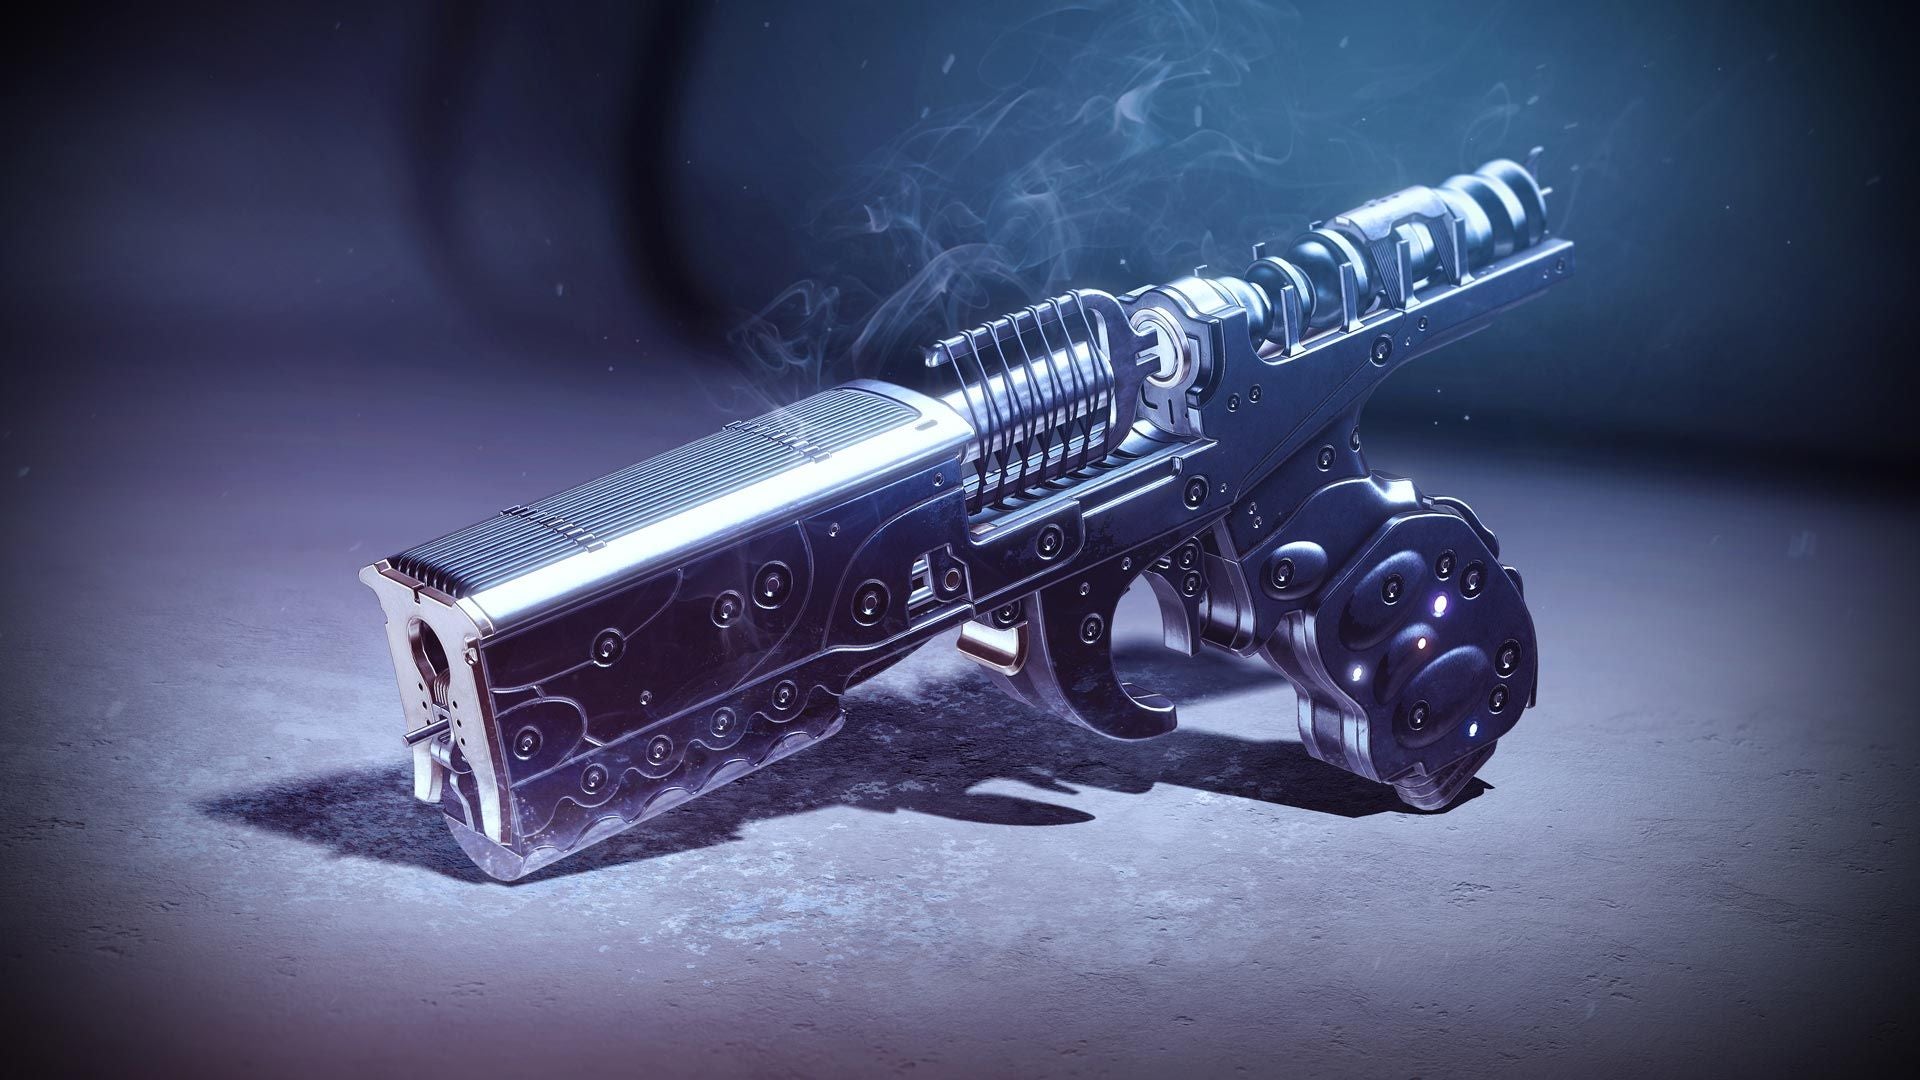 Destiny 2 Exotics List New Season Of The Seraph Weapons And The Witch Queen Exotics Listed Eurogamer Net